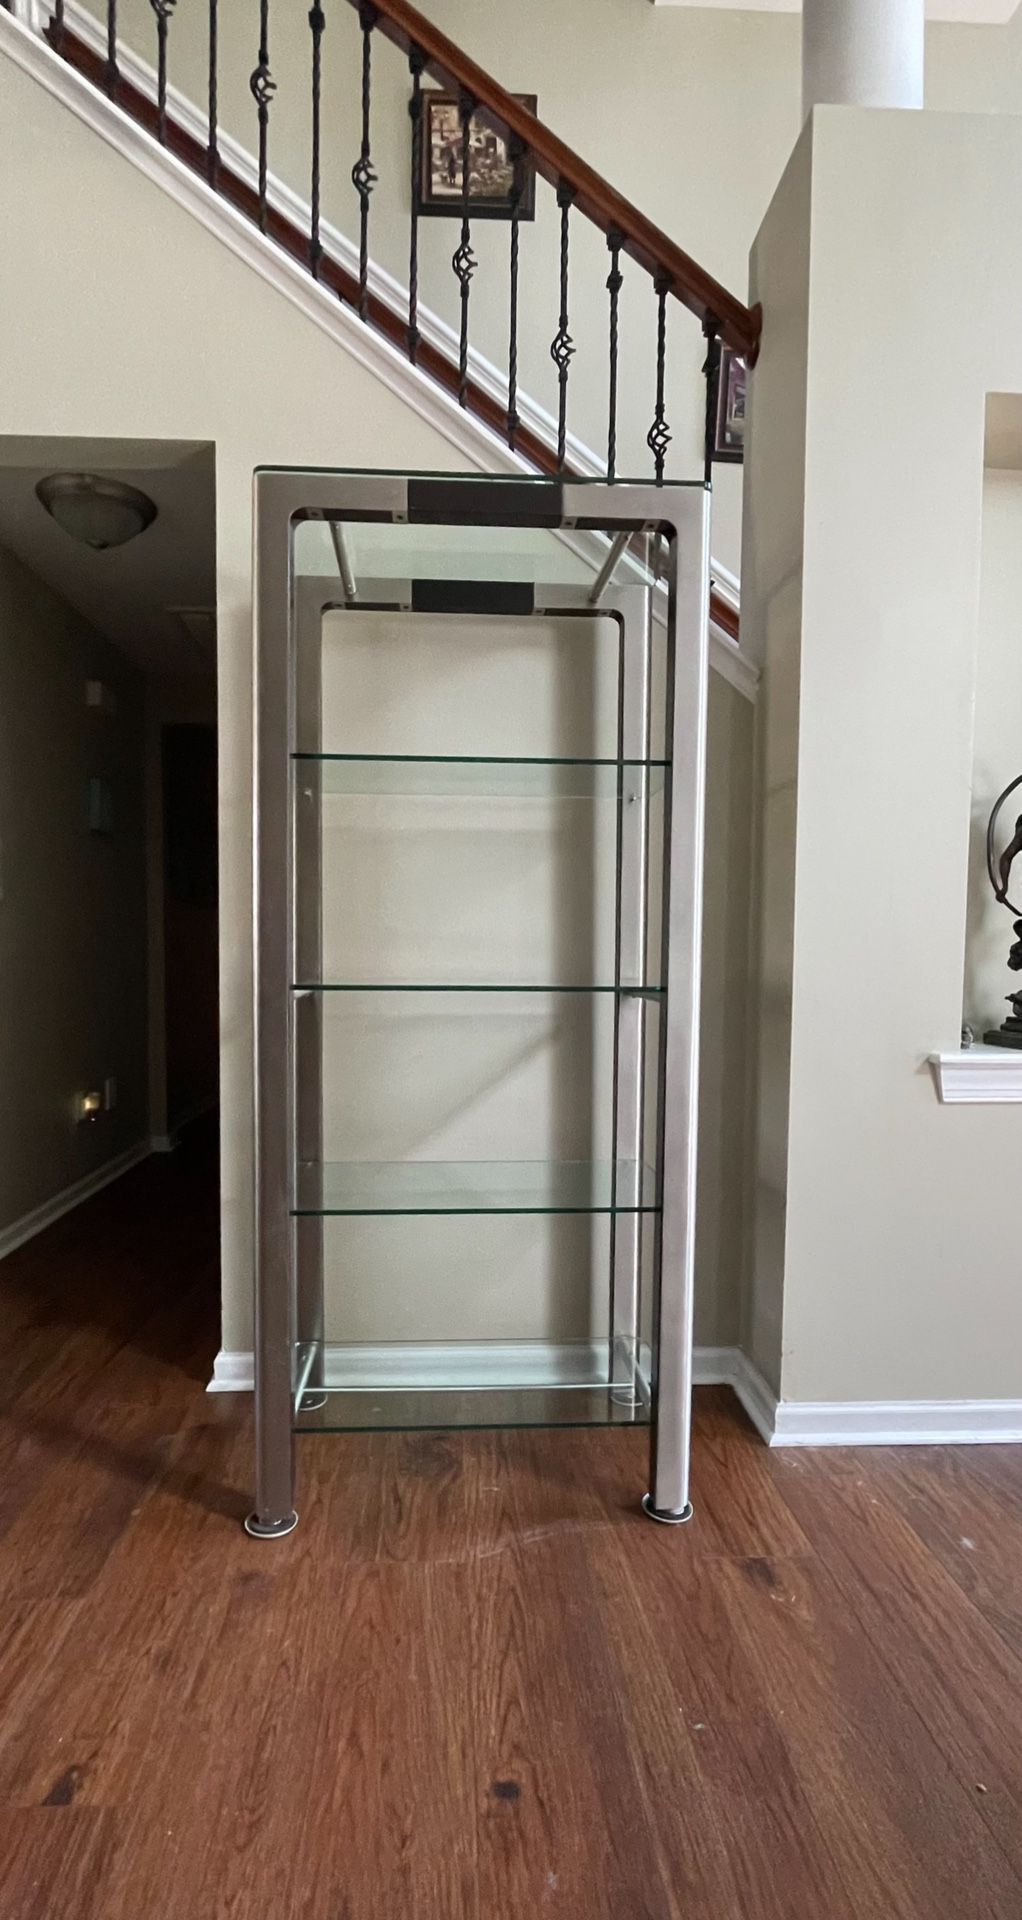 Shelving Unit For display Or Bookcase